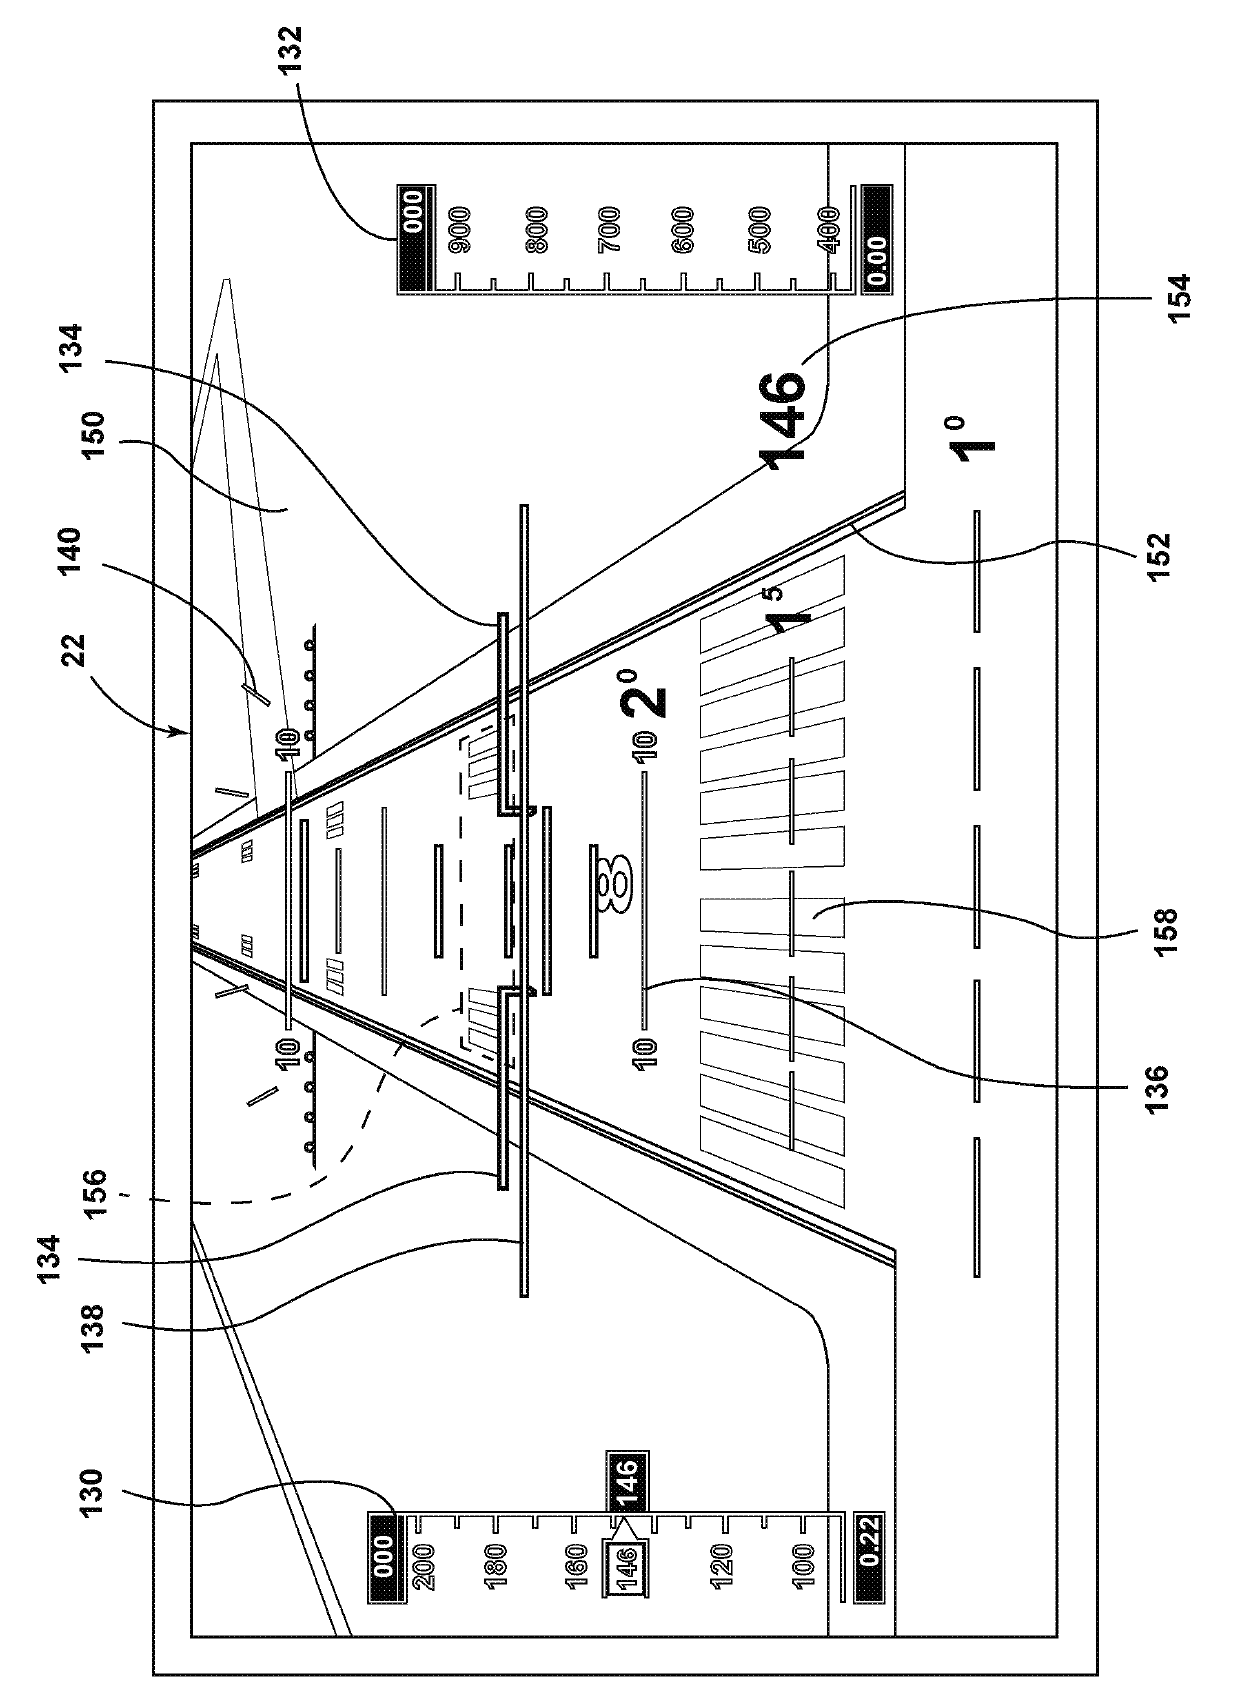 Method for illustrating aircraft situational information